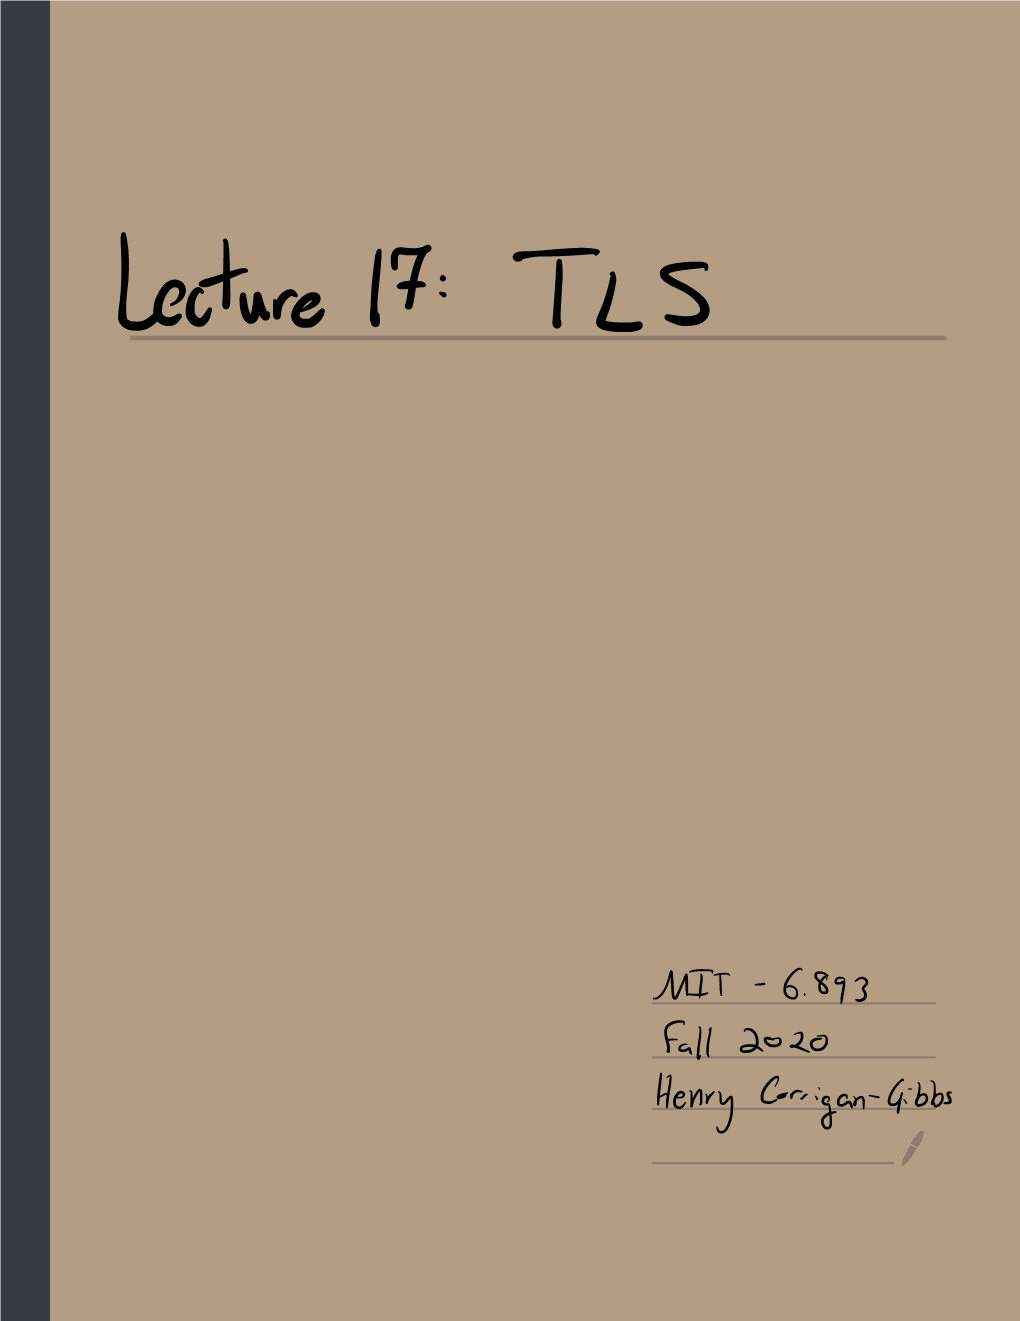 Lecture 17 : TLS